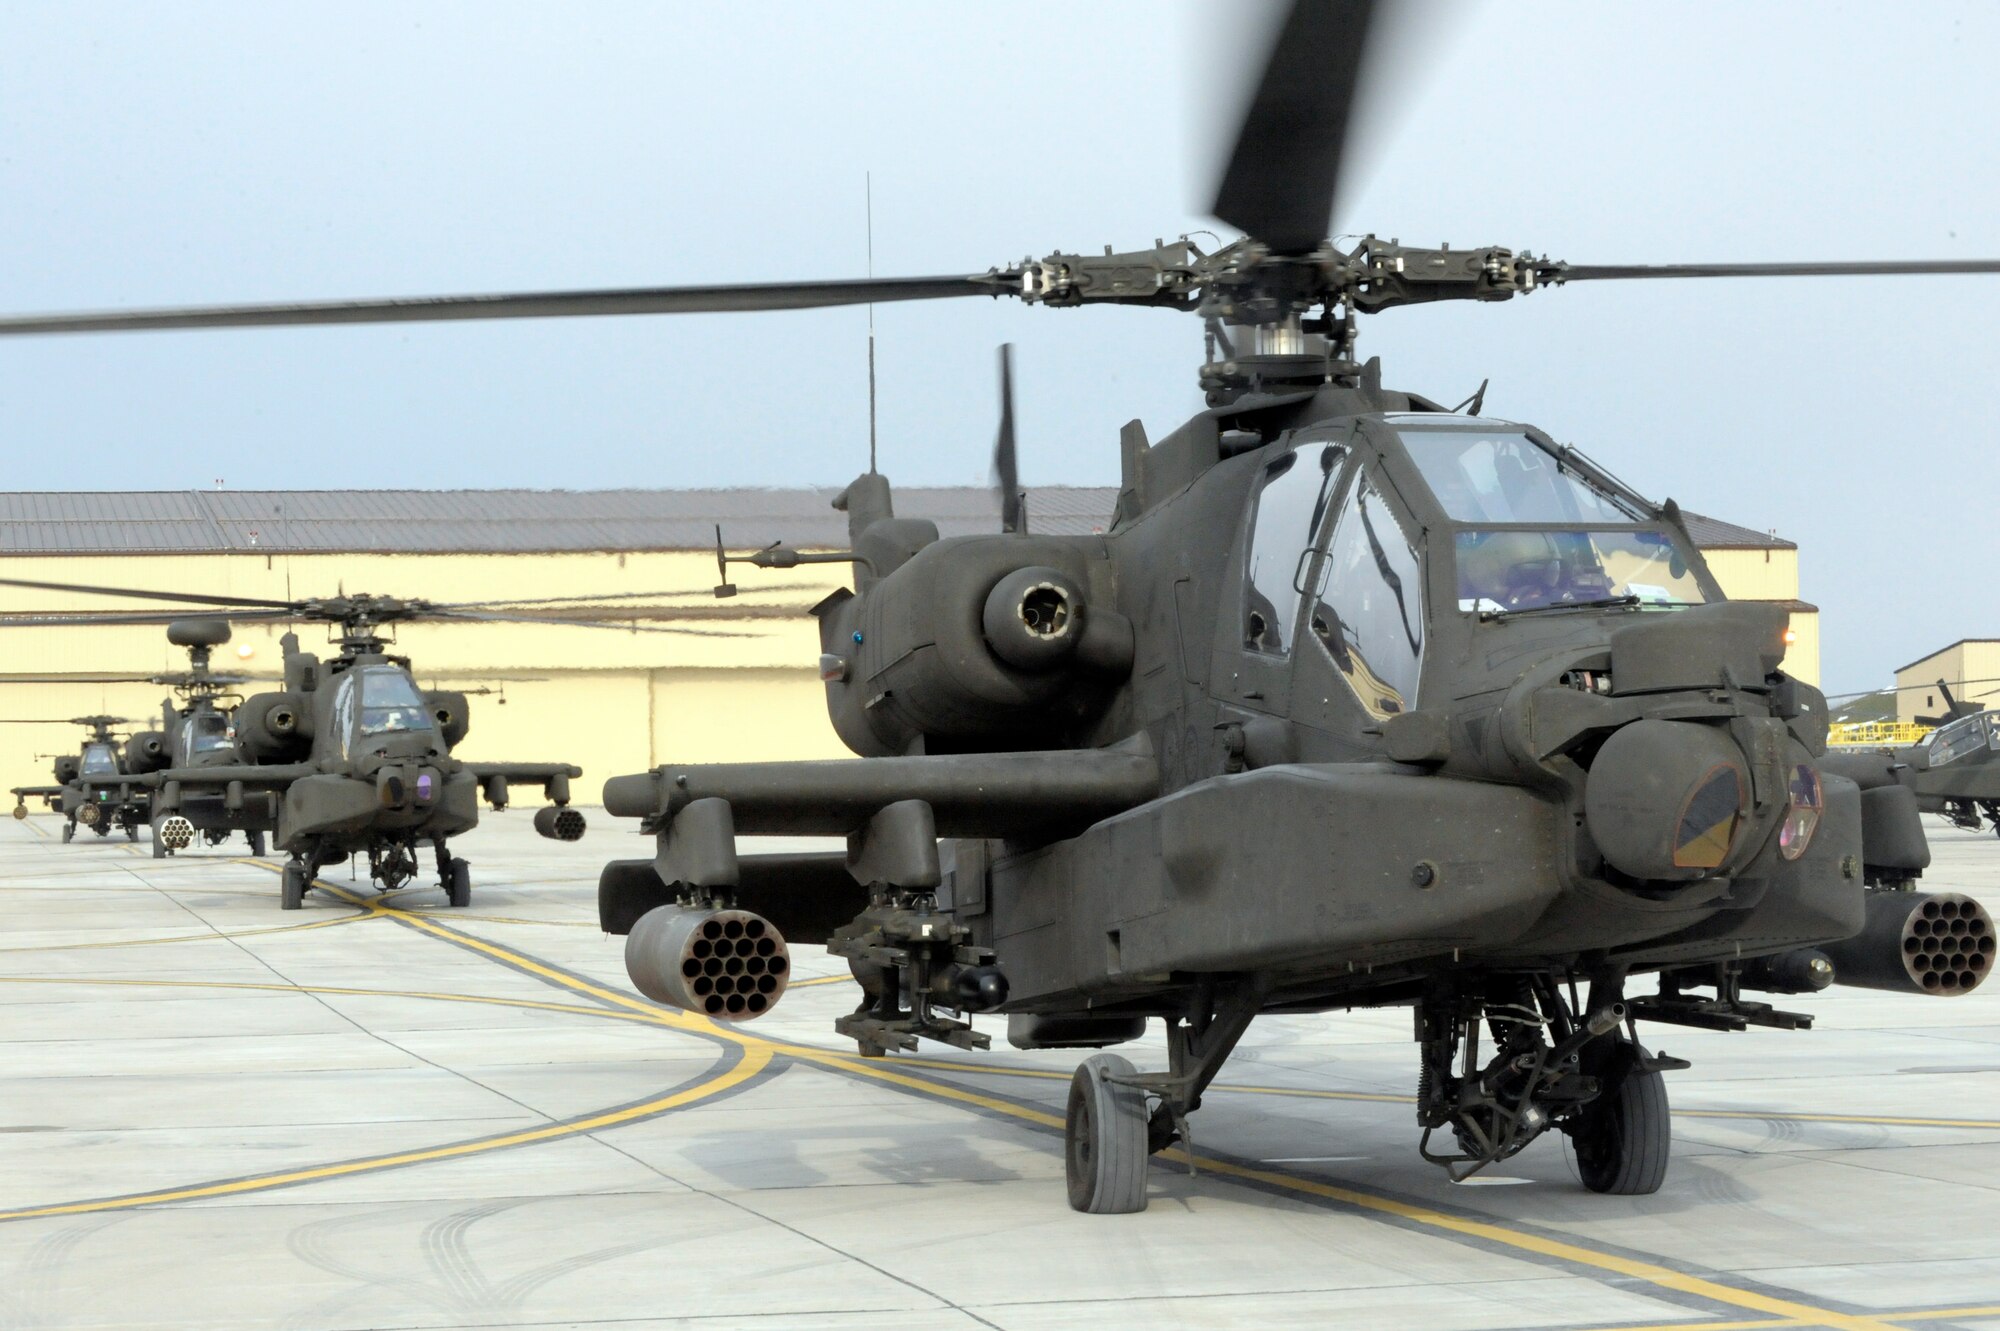 U.S. Army AH-64 Apache Longbows pilots from the 1-135th Attack Reconnaissance Battalion at Whiteman Air Force Base, Mo., prepare March 27, 2013, for their deployment to Afghanistan. The Apaches have been battlefield-tested for about 10 years. (U.S. Air Force photo by Airman 1st Class Shelby R. Orozco/Released)